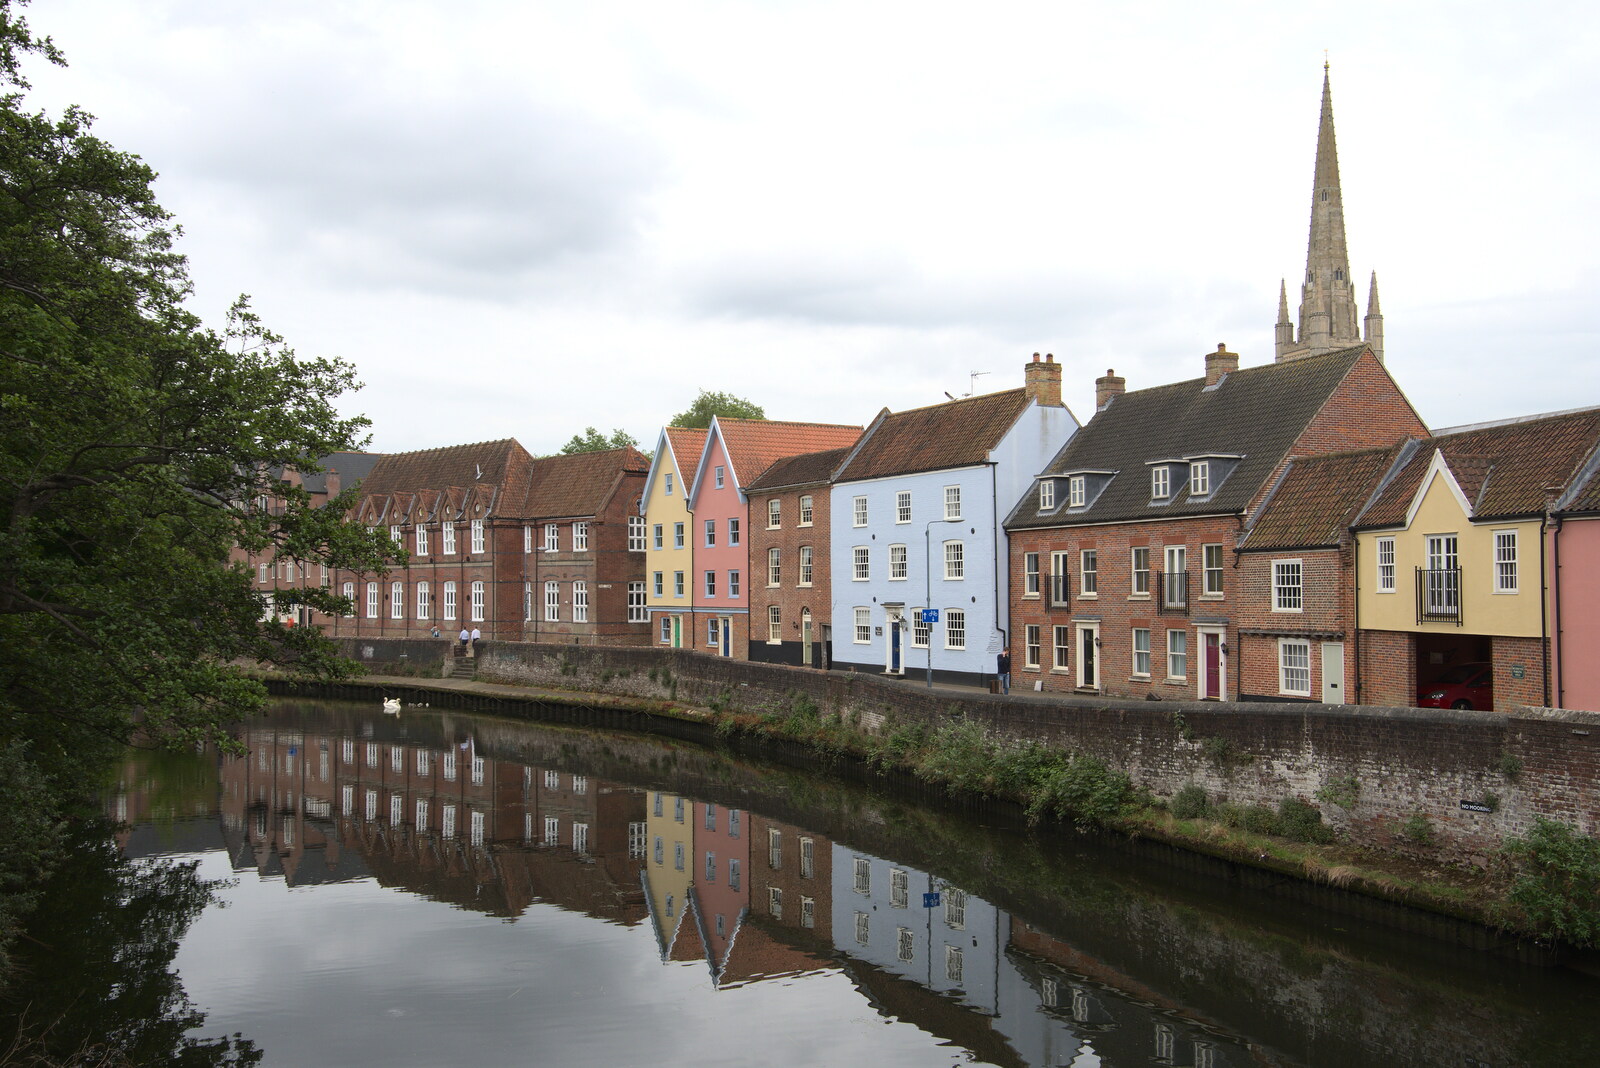 The Wensum almost looks like Bruges from Discovering the Hidden City: Norwich, Norfolk - 23rd May 2022